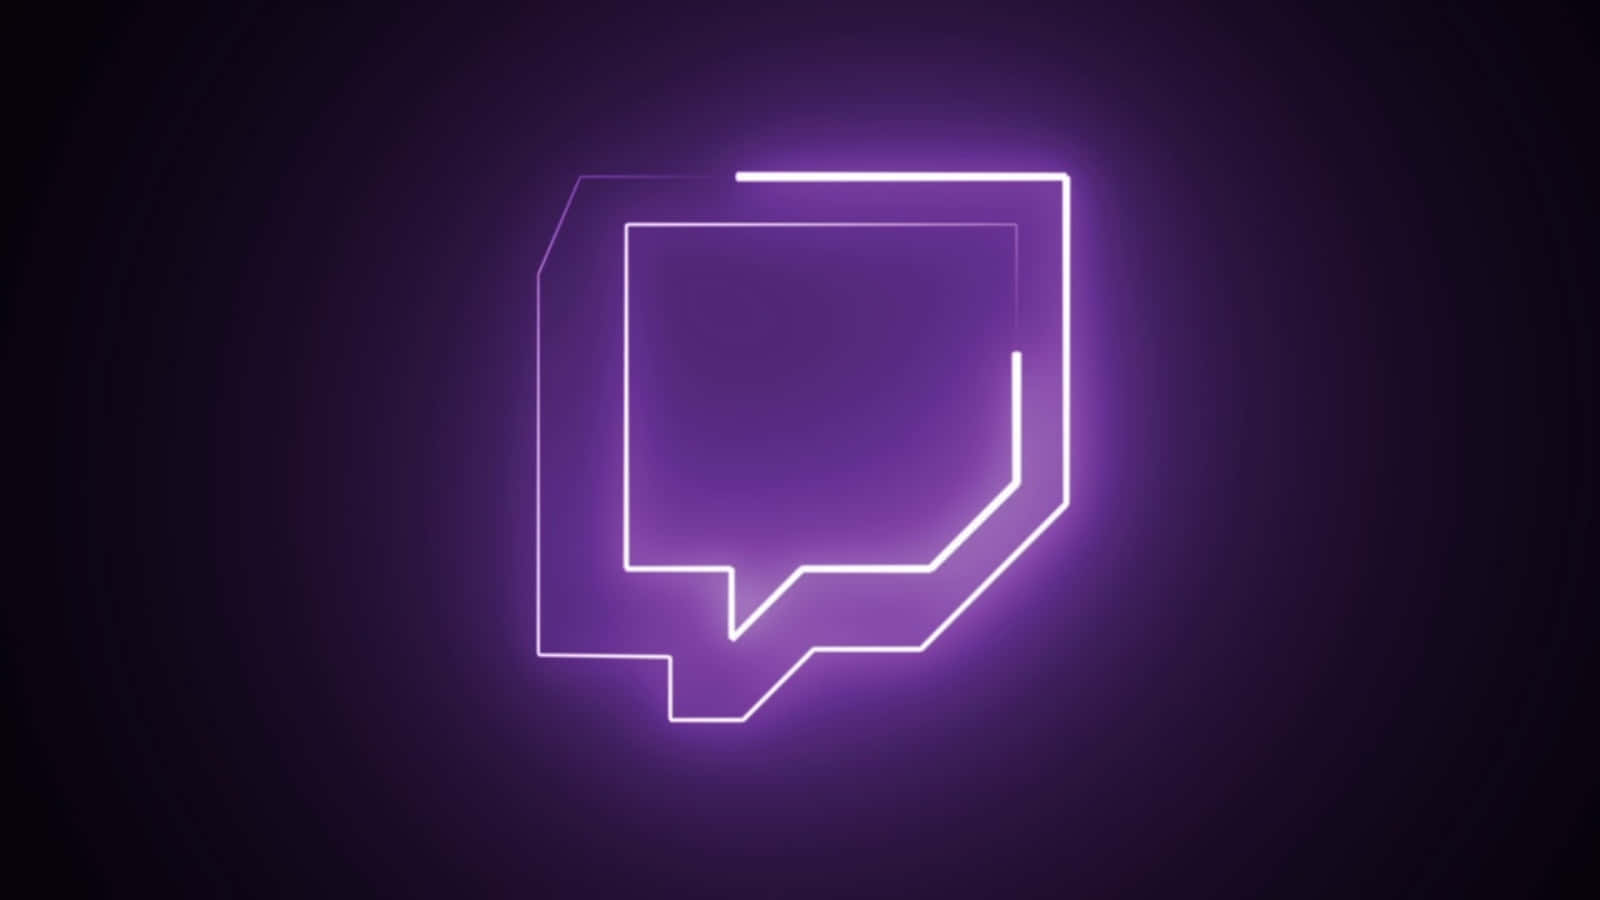 "The future of Twitch: Greater Possibilities, New Horizons"